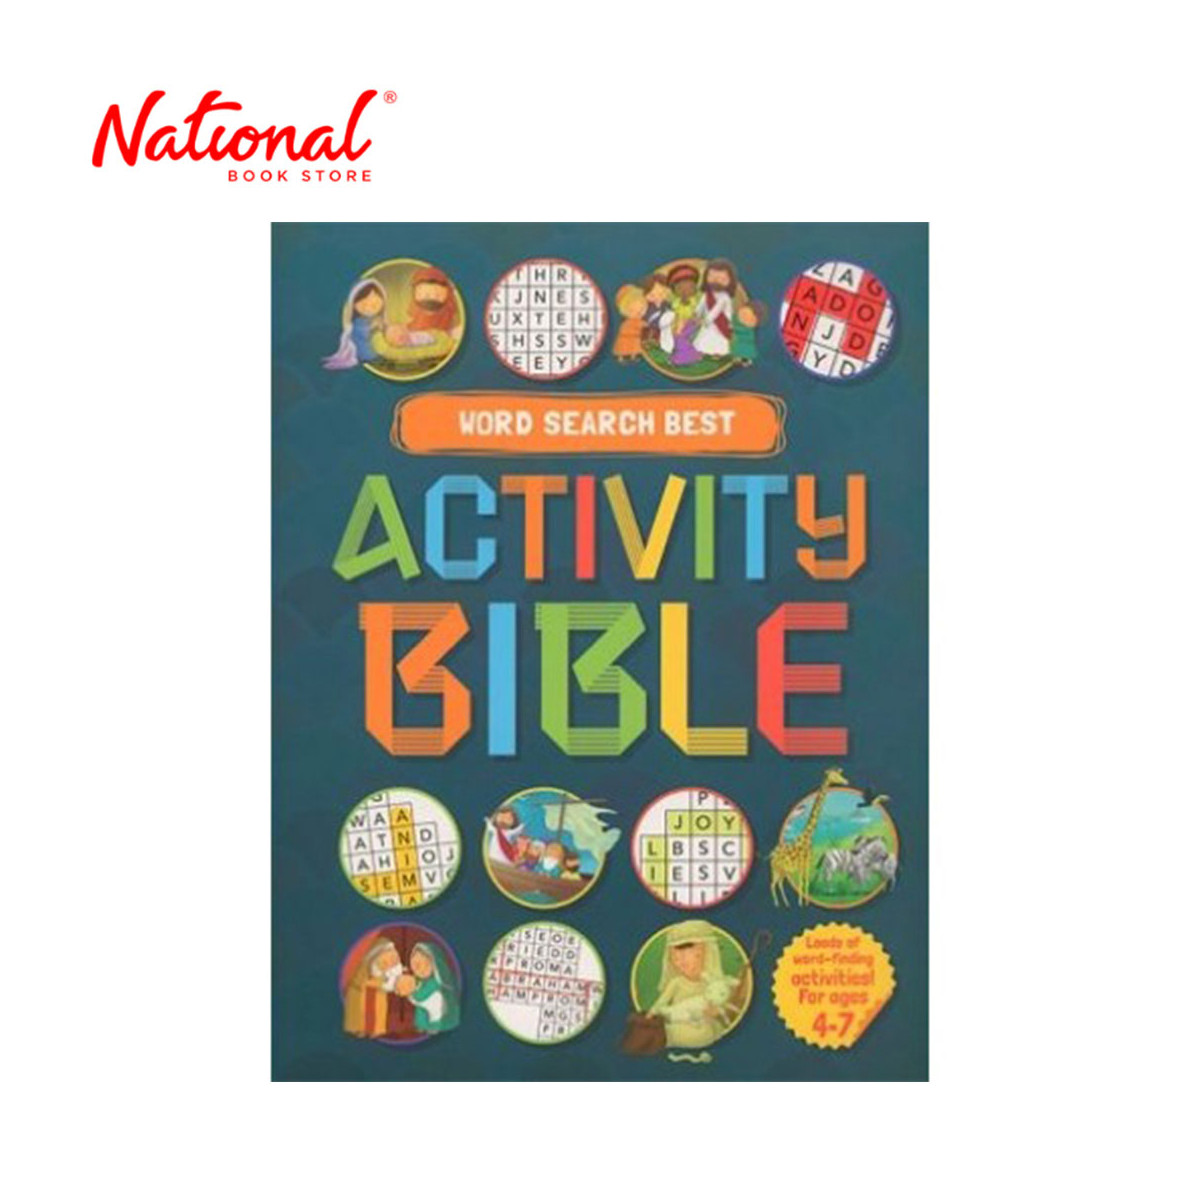 Word Search Best Activity Bible - Trade Paperback - Bible Stories for Kids